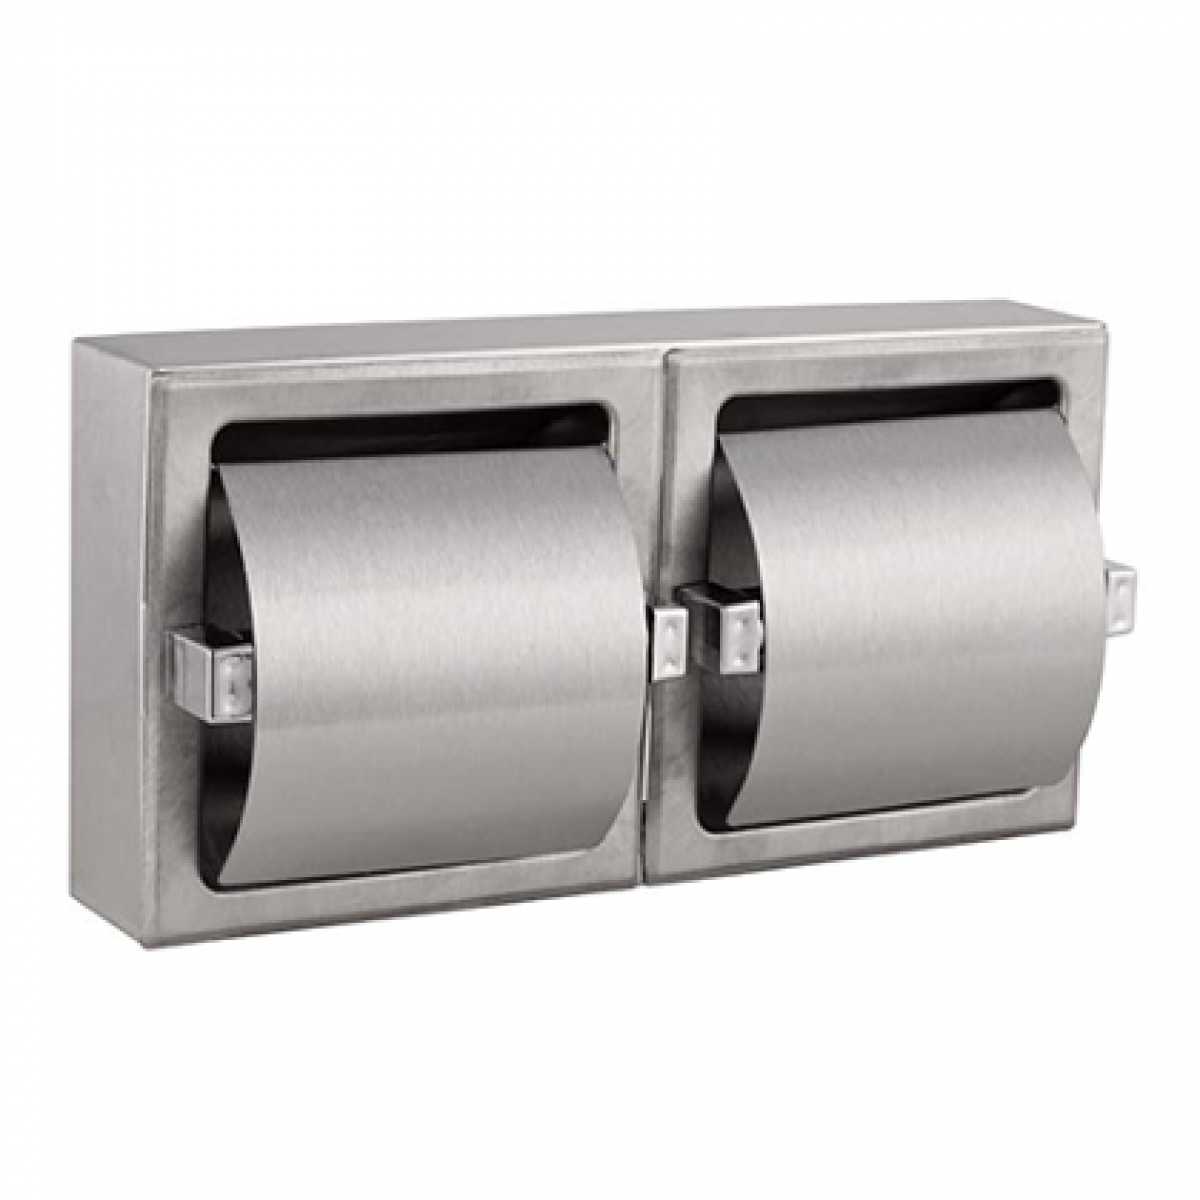 Toilet Roll Holder Non-recessed, Double